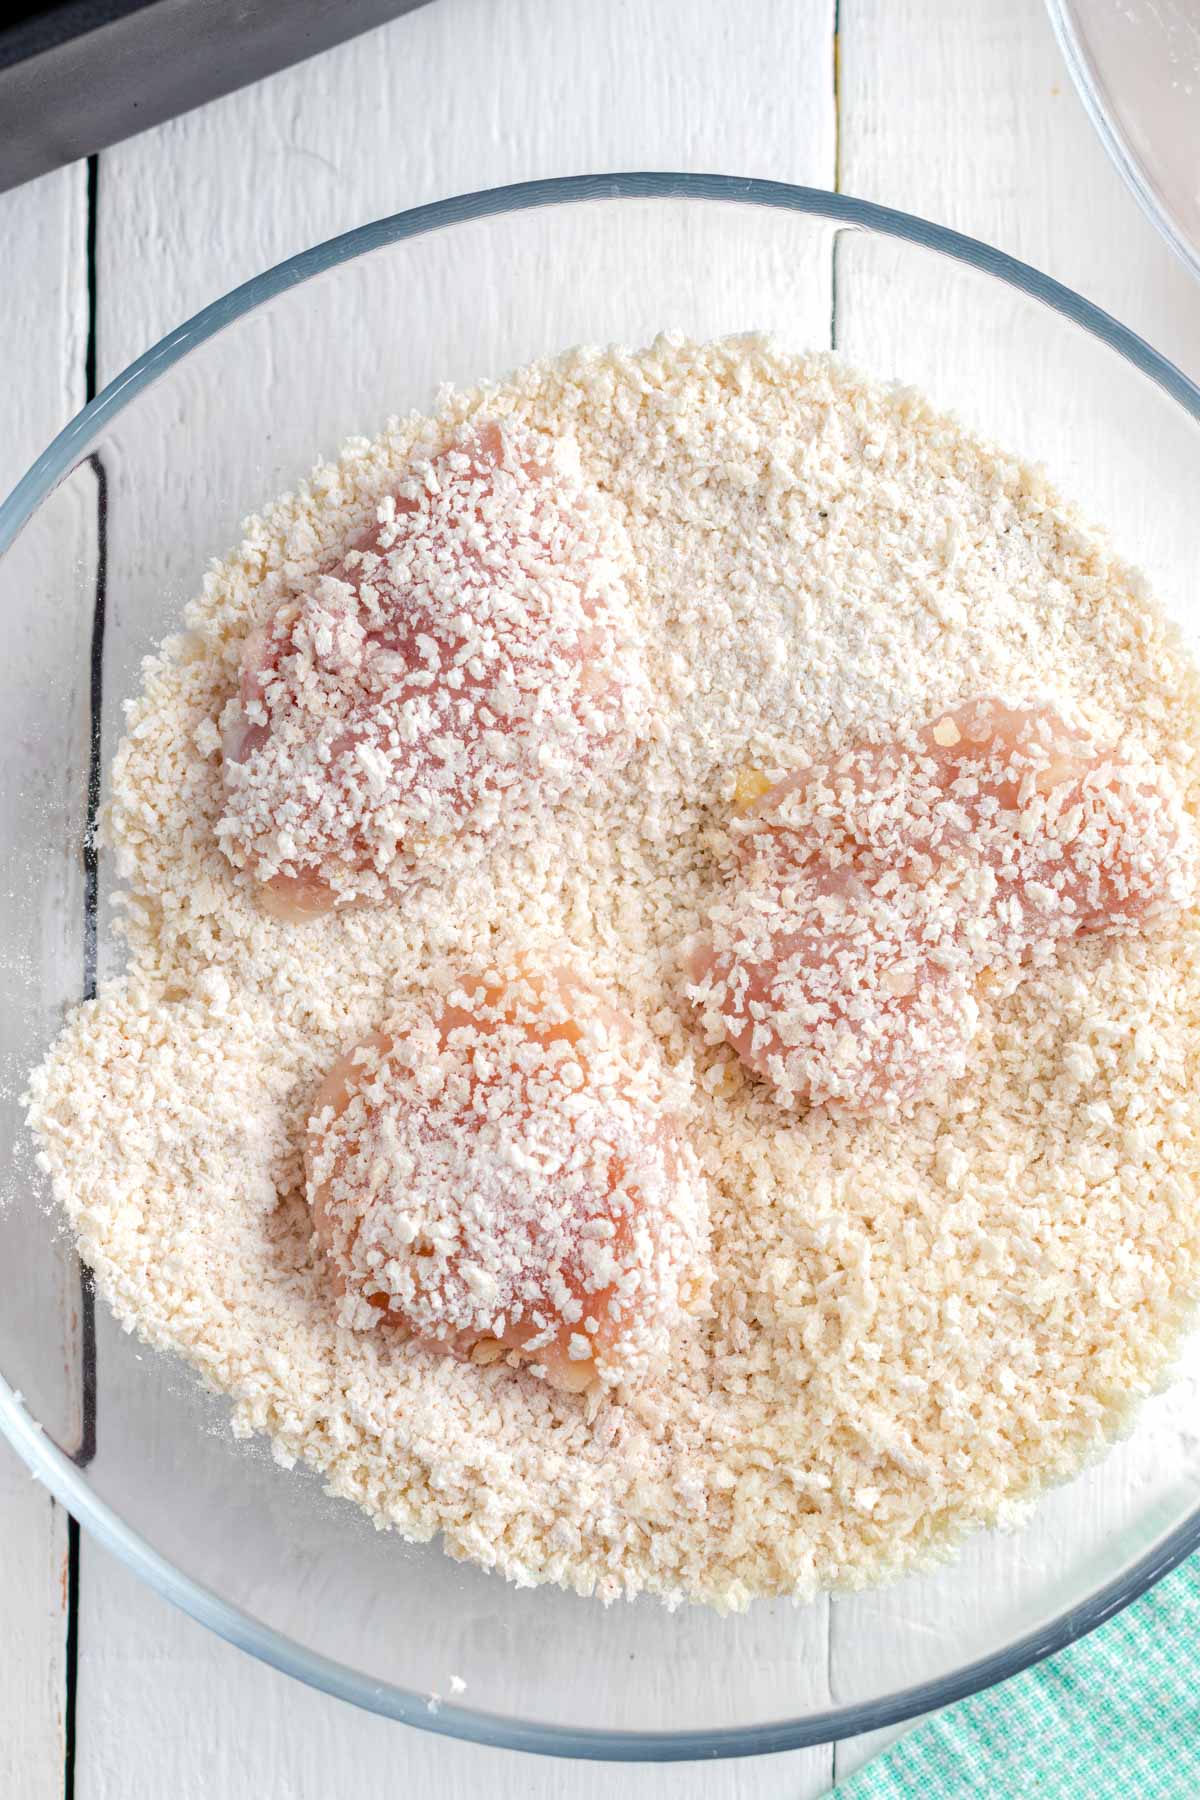 Coat the chicken nuggets thoroughly with seasoned panko before adding it to your air fryer.